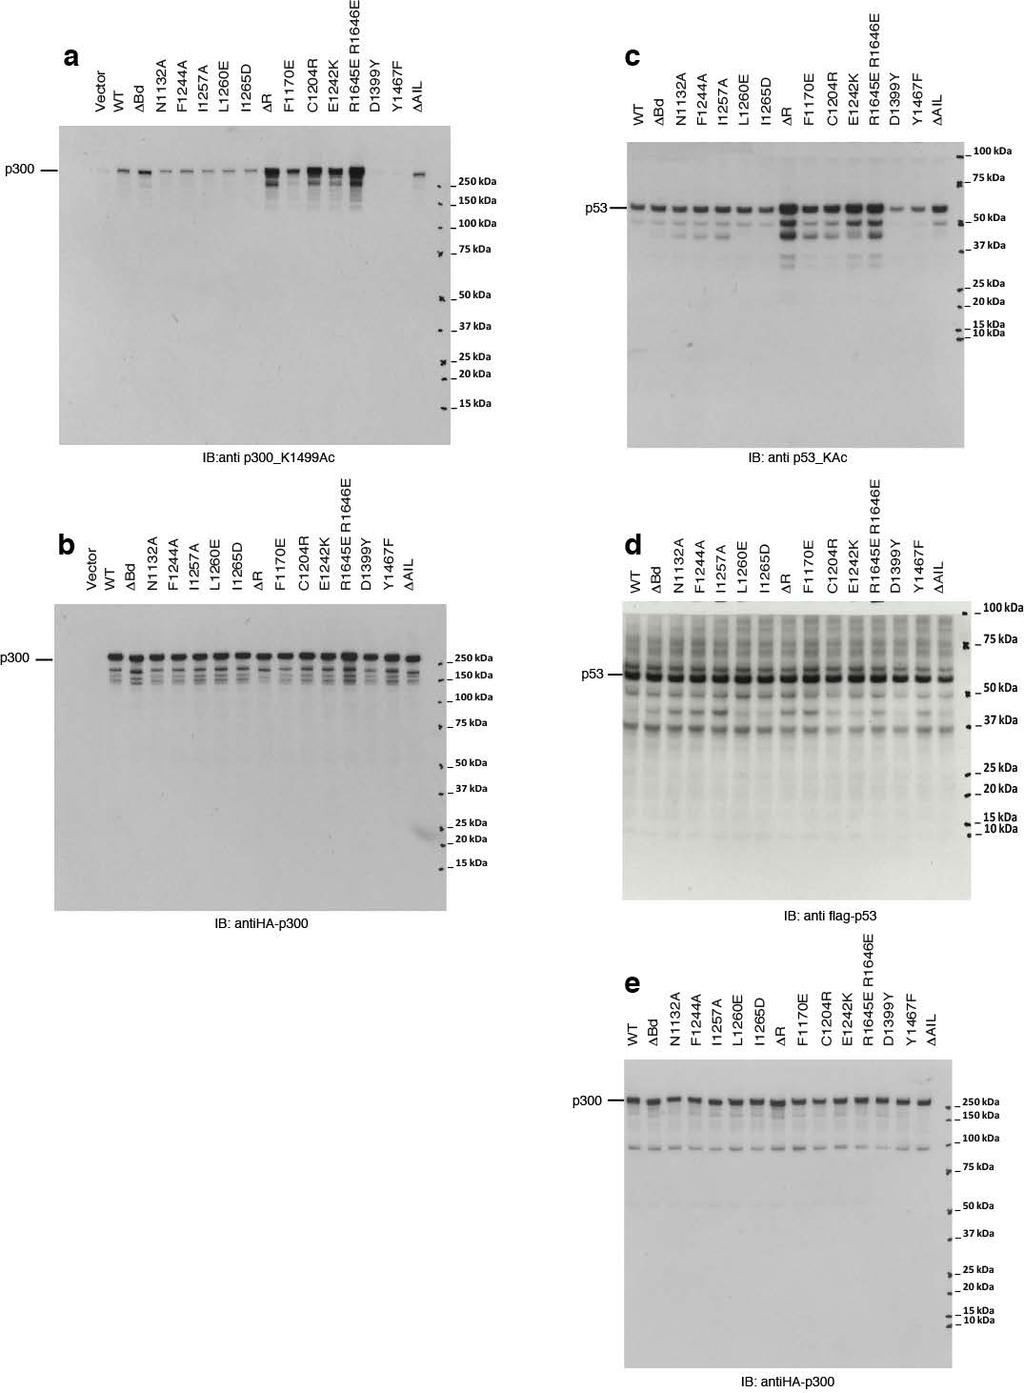 Supplementary Fig.6 Uncropped images for the blots shown in figure 4 a and b. (a) Anti p300 K1499 acetyl immunoblot of lysates of H1299 cells transfected with the indicated mutants.